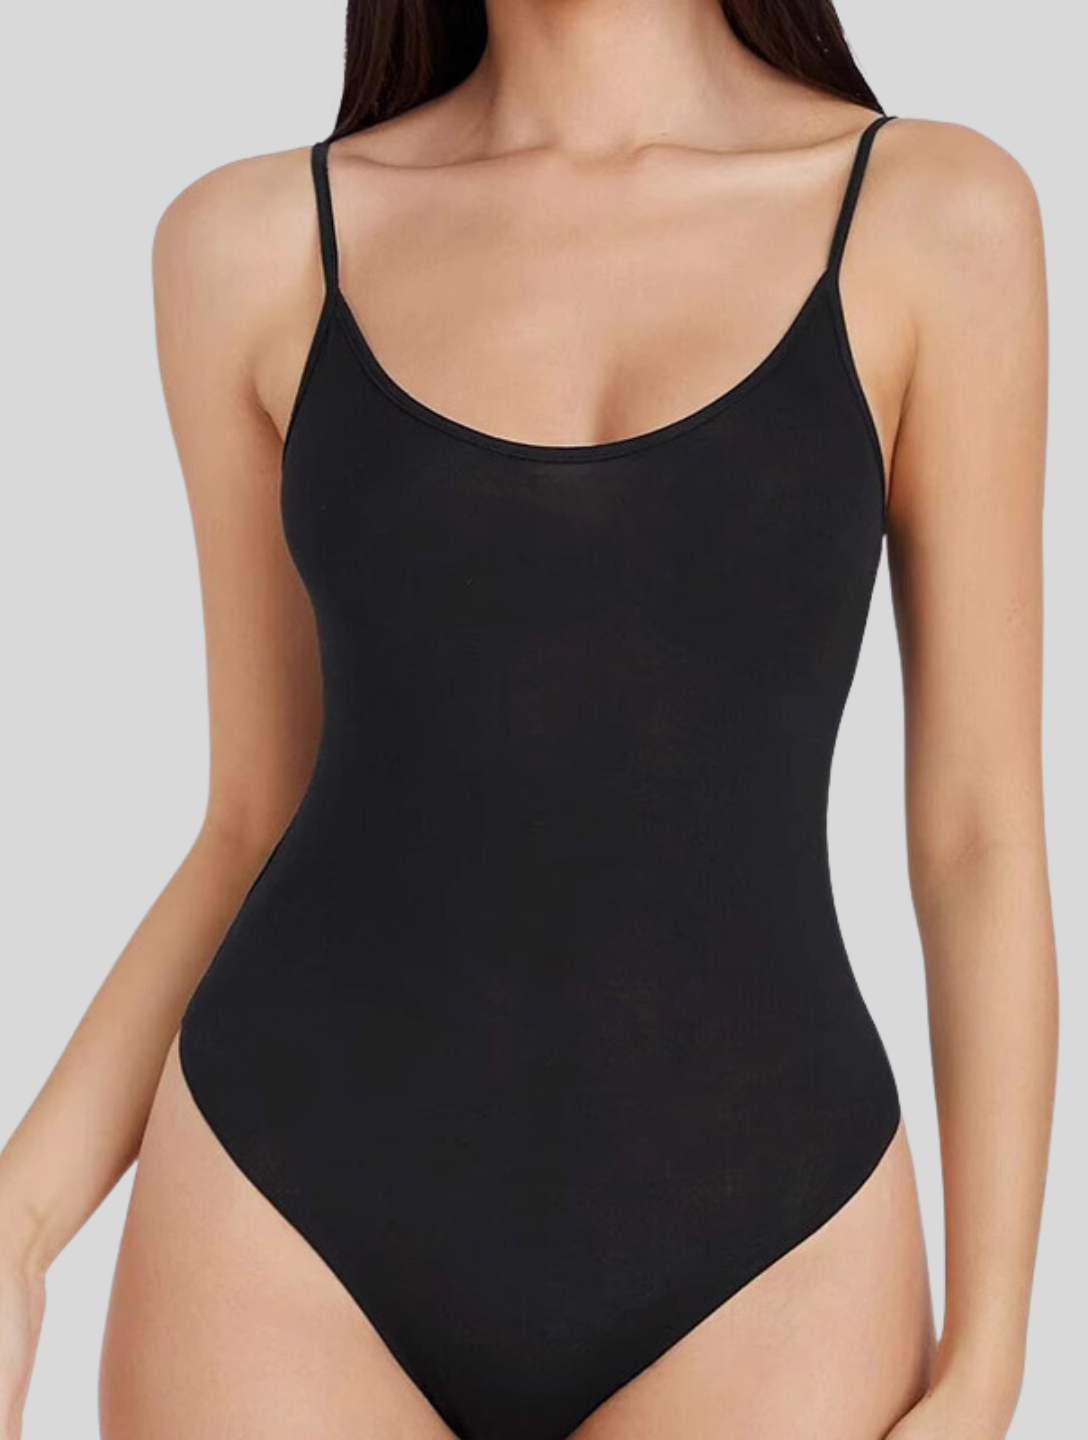 Cami Bodysuit with Thong Back XL, 44,95 €